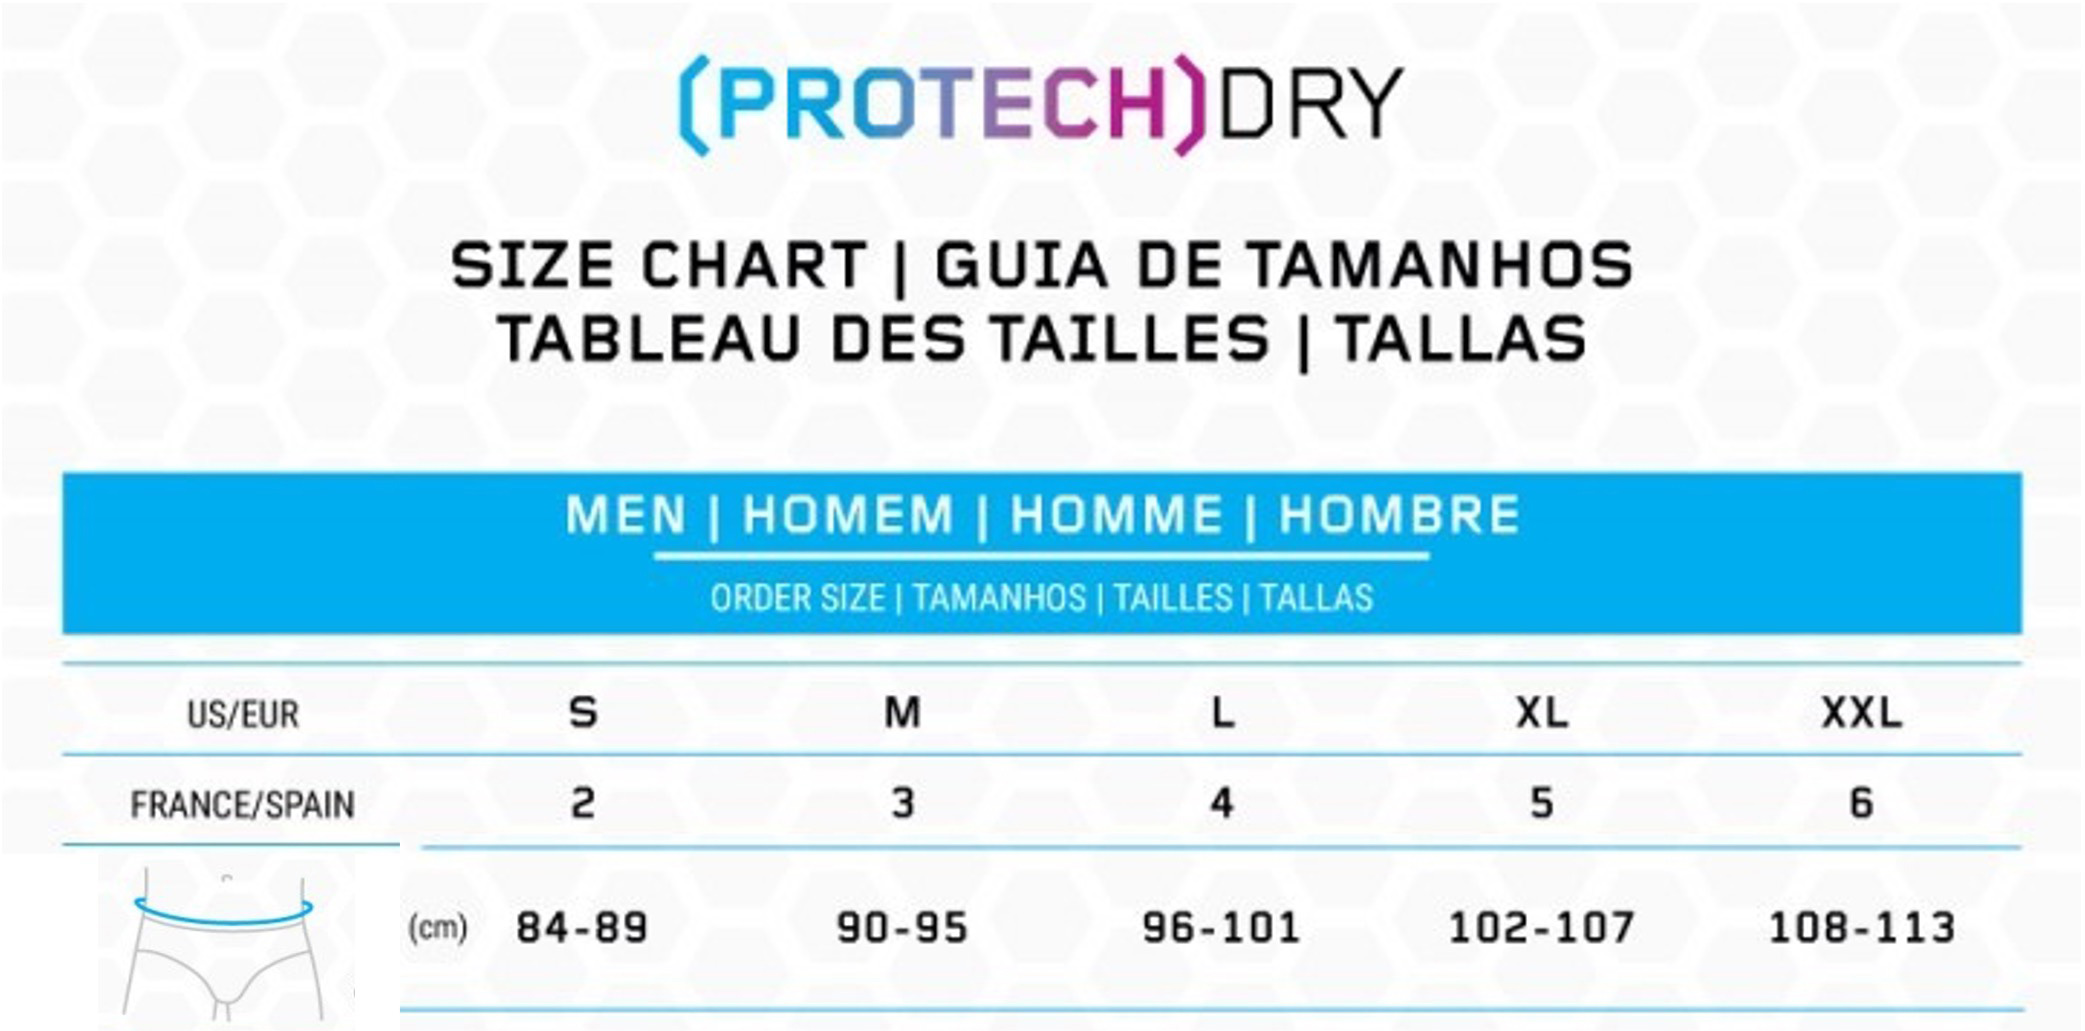 Guide des tailles hommes ProtechDry.jpg